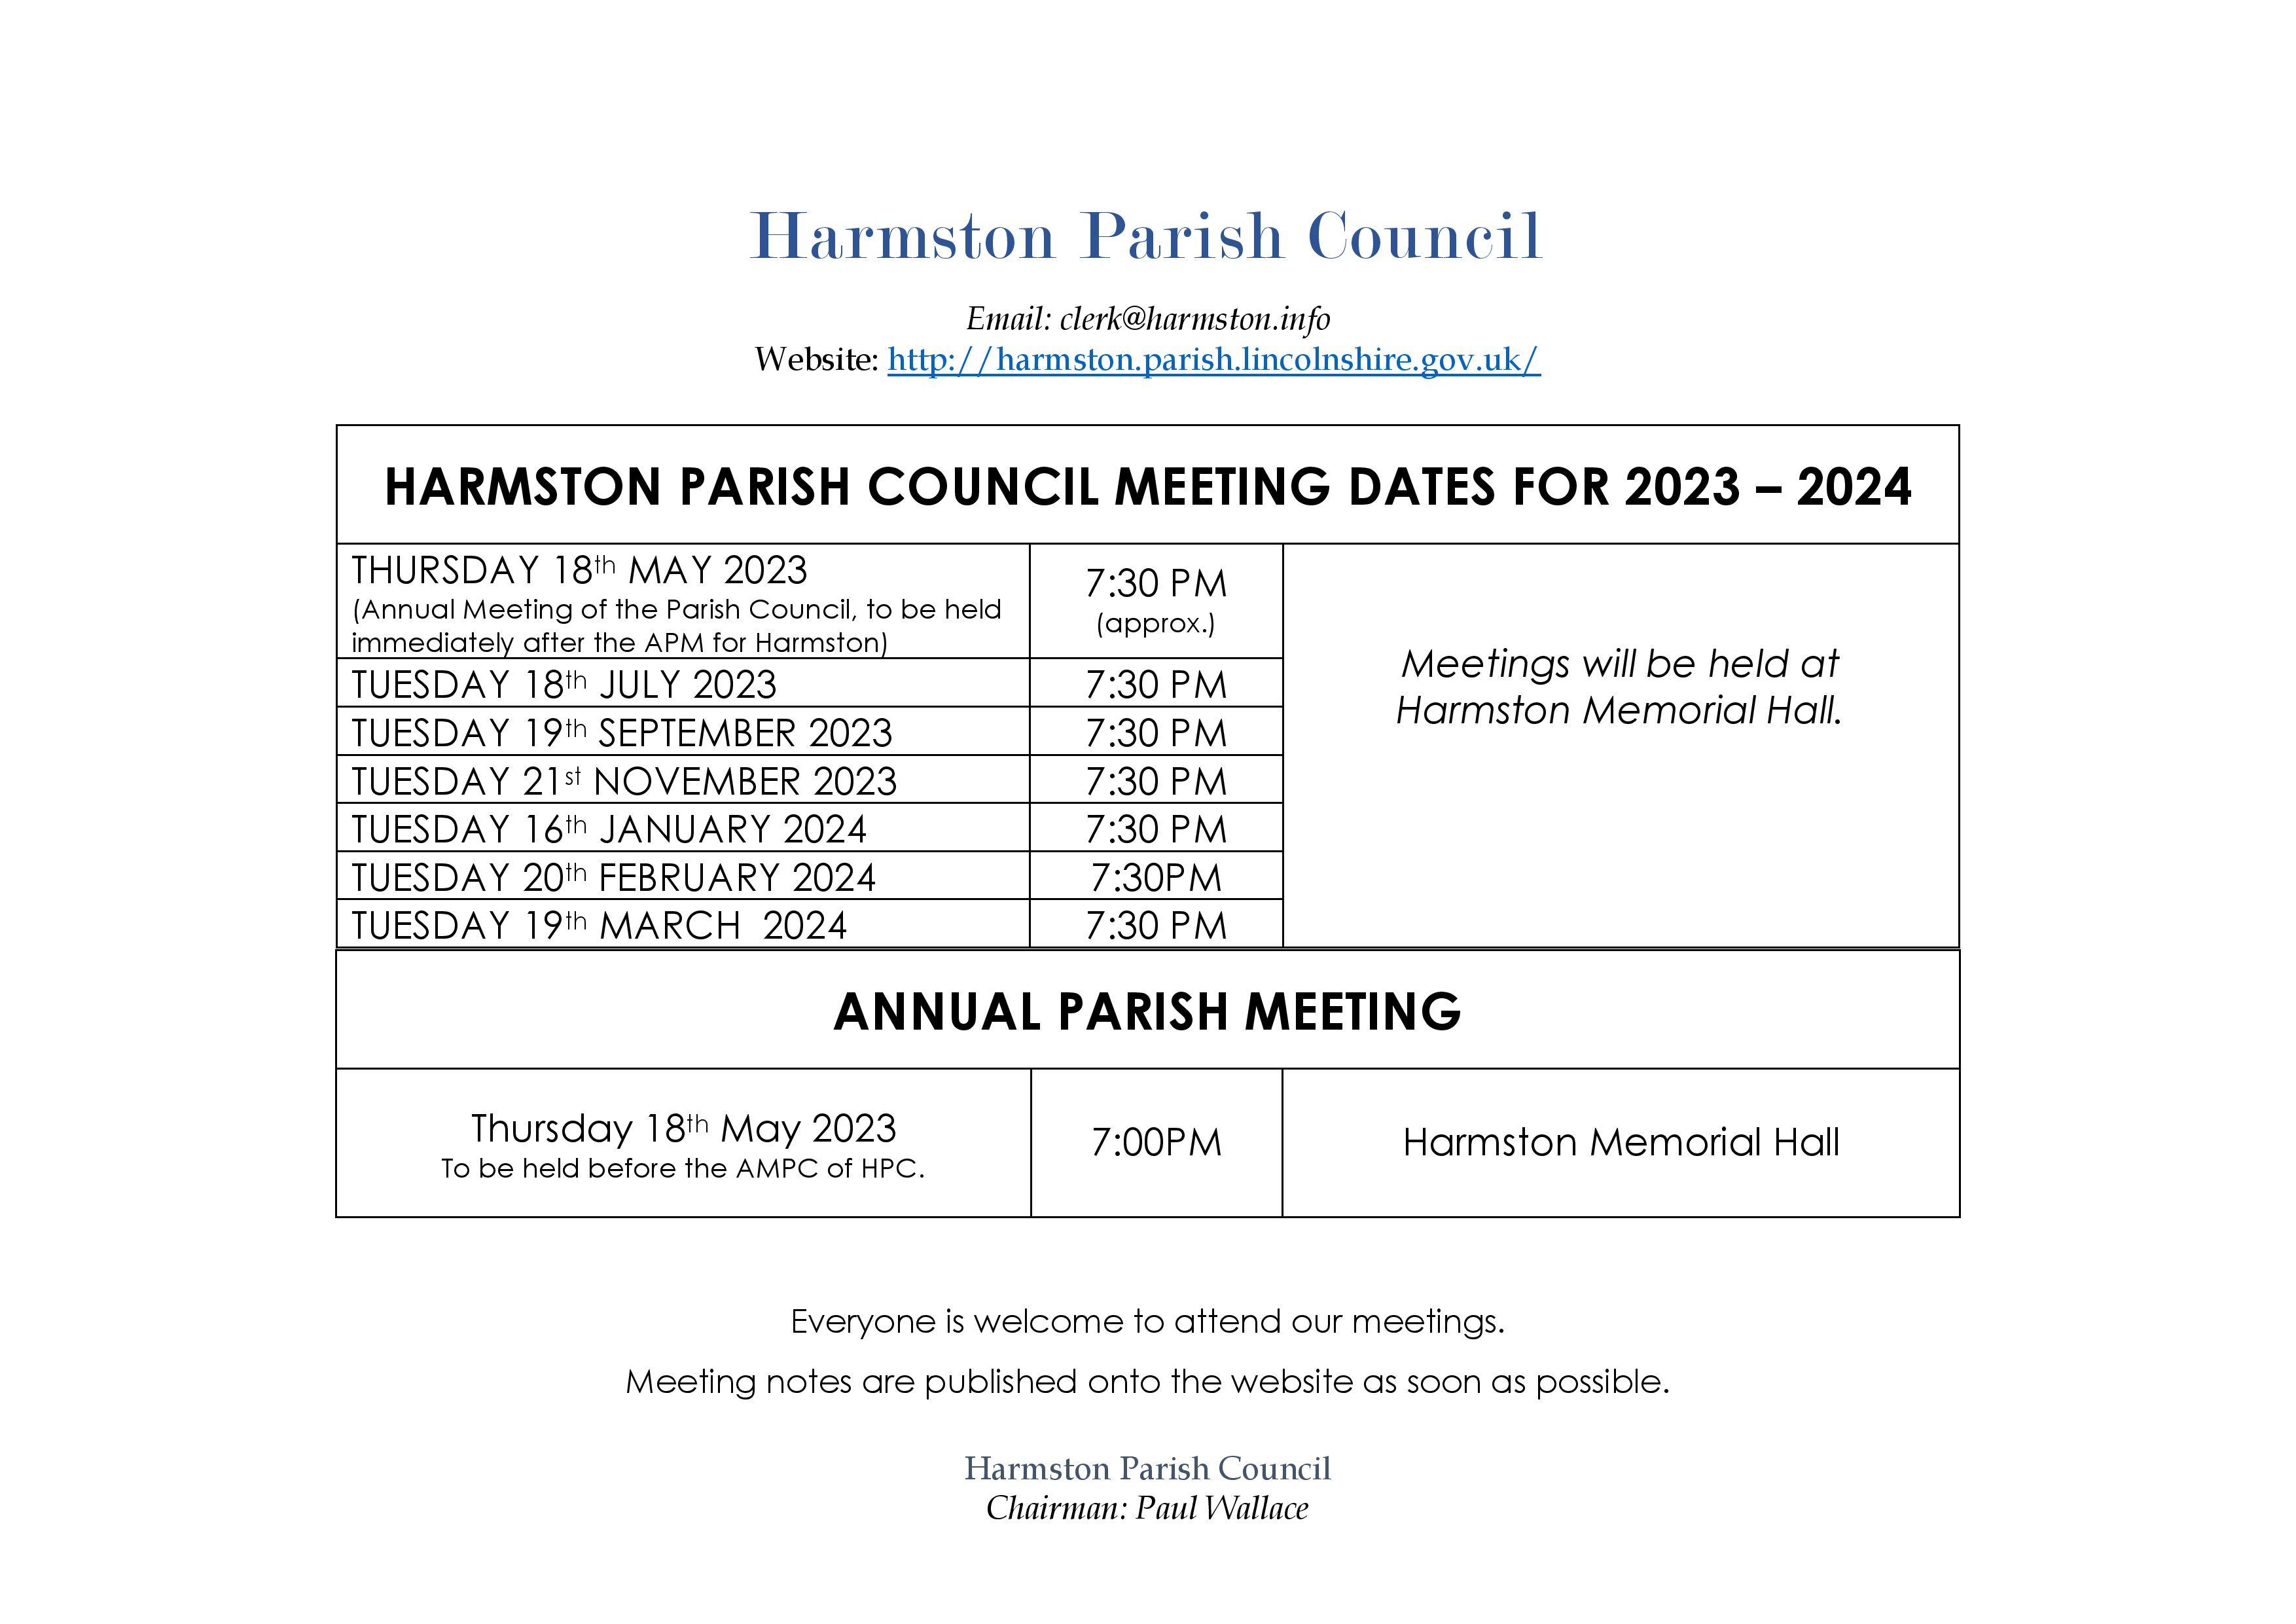 HPC meeting dates for 2023-2024